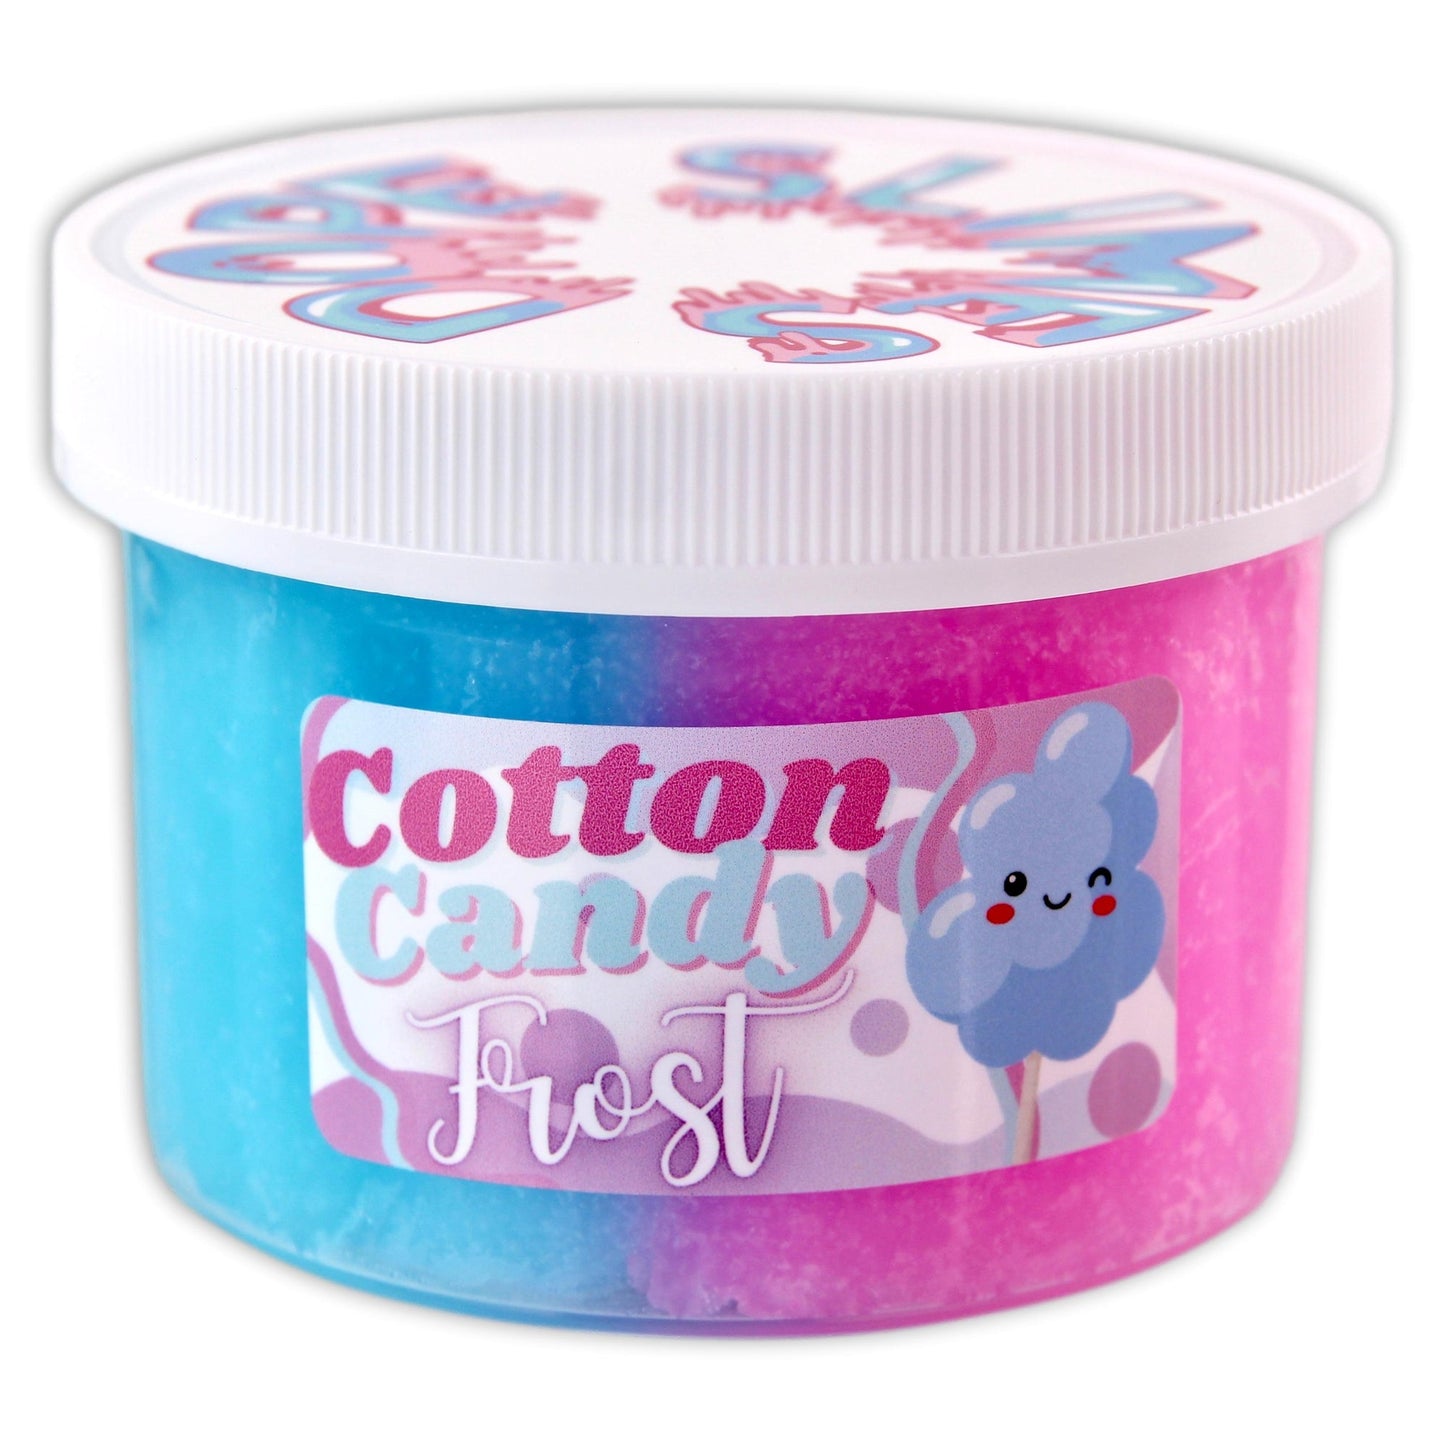 【Buy 2 Get 1 Free】COTTON CANDY FROST